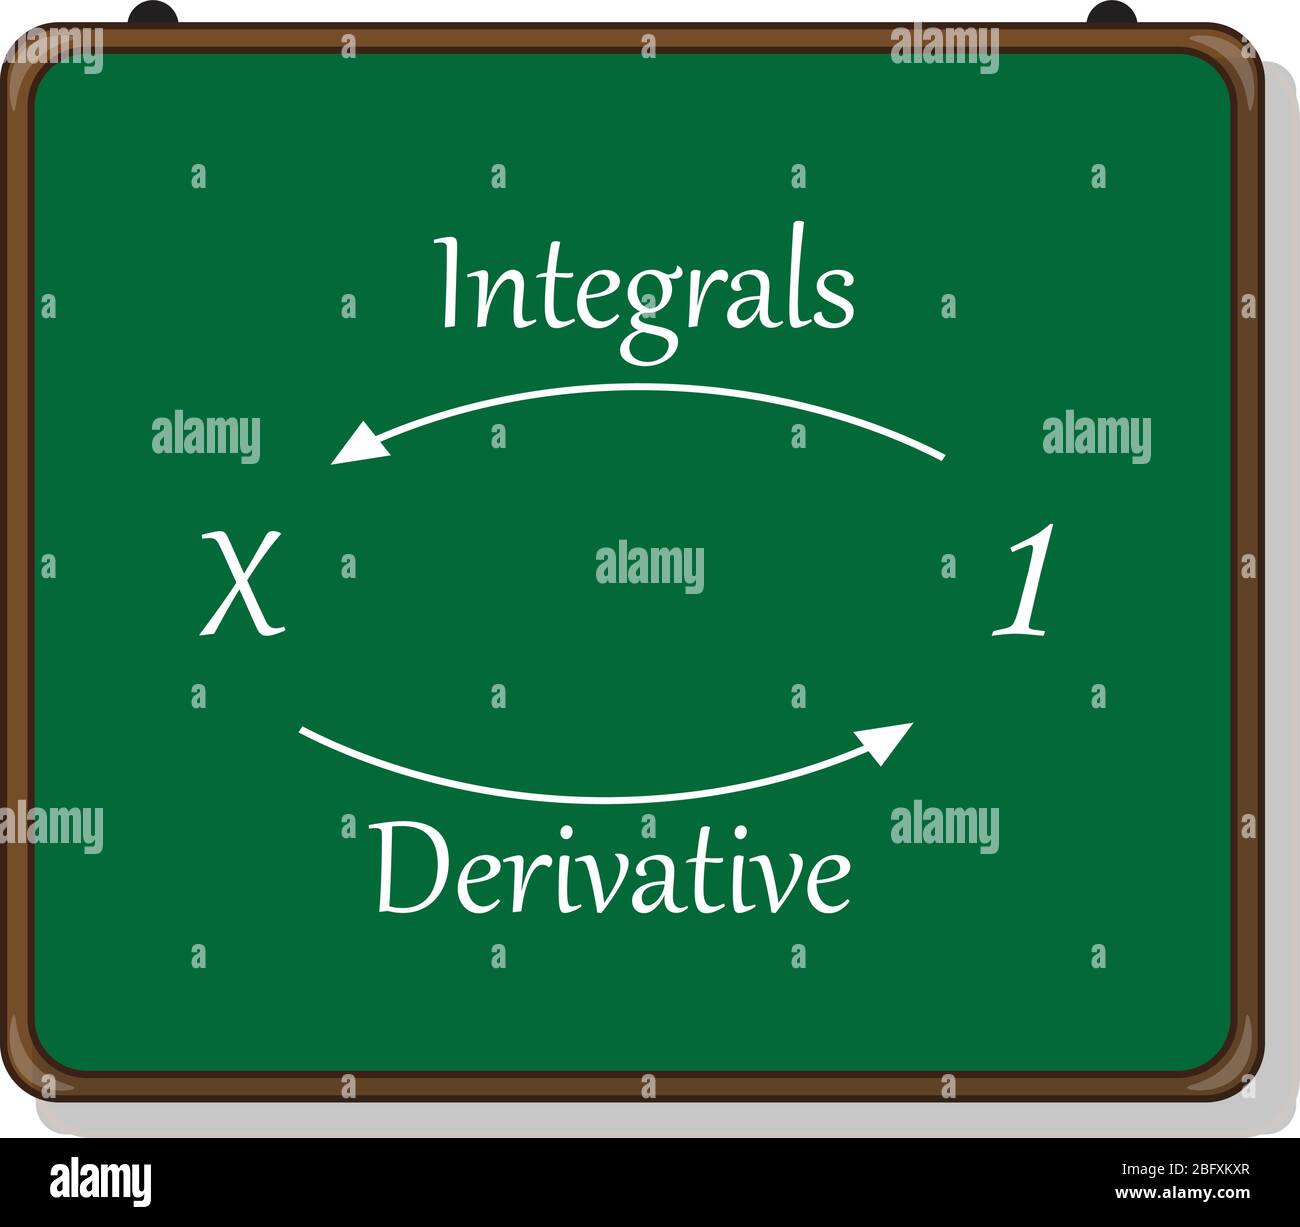 introduction to integration, derivatives and integrals. Stock Vector